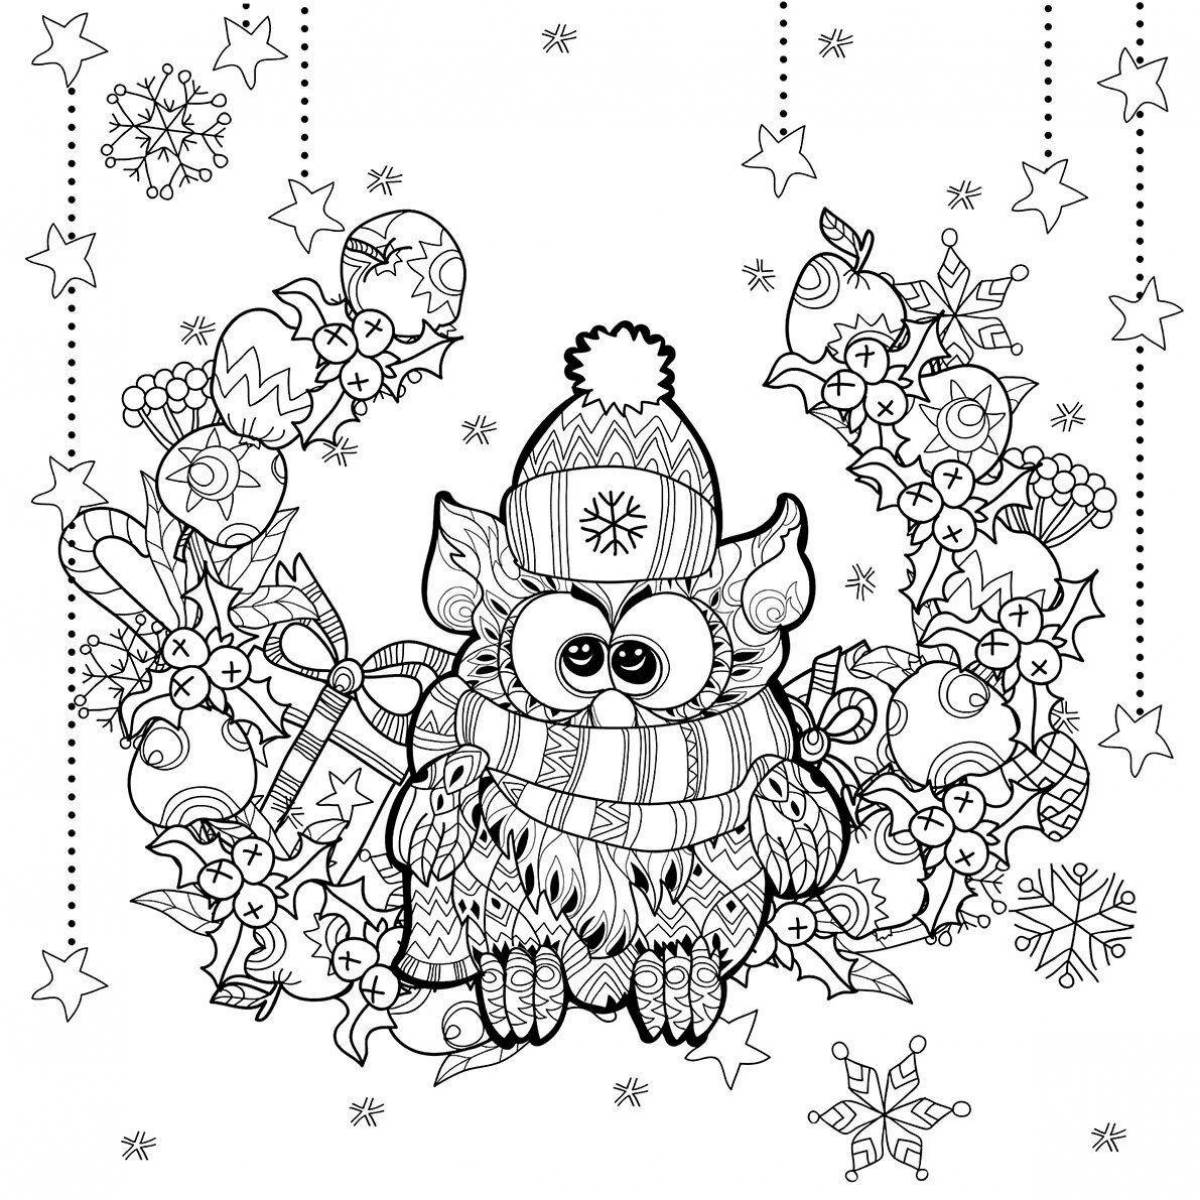 Blessed Christmas owl coloring page